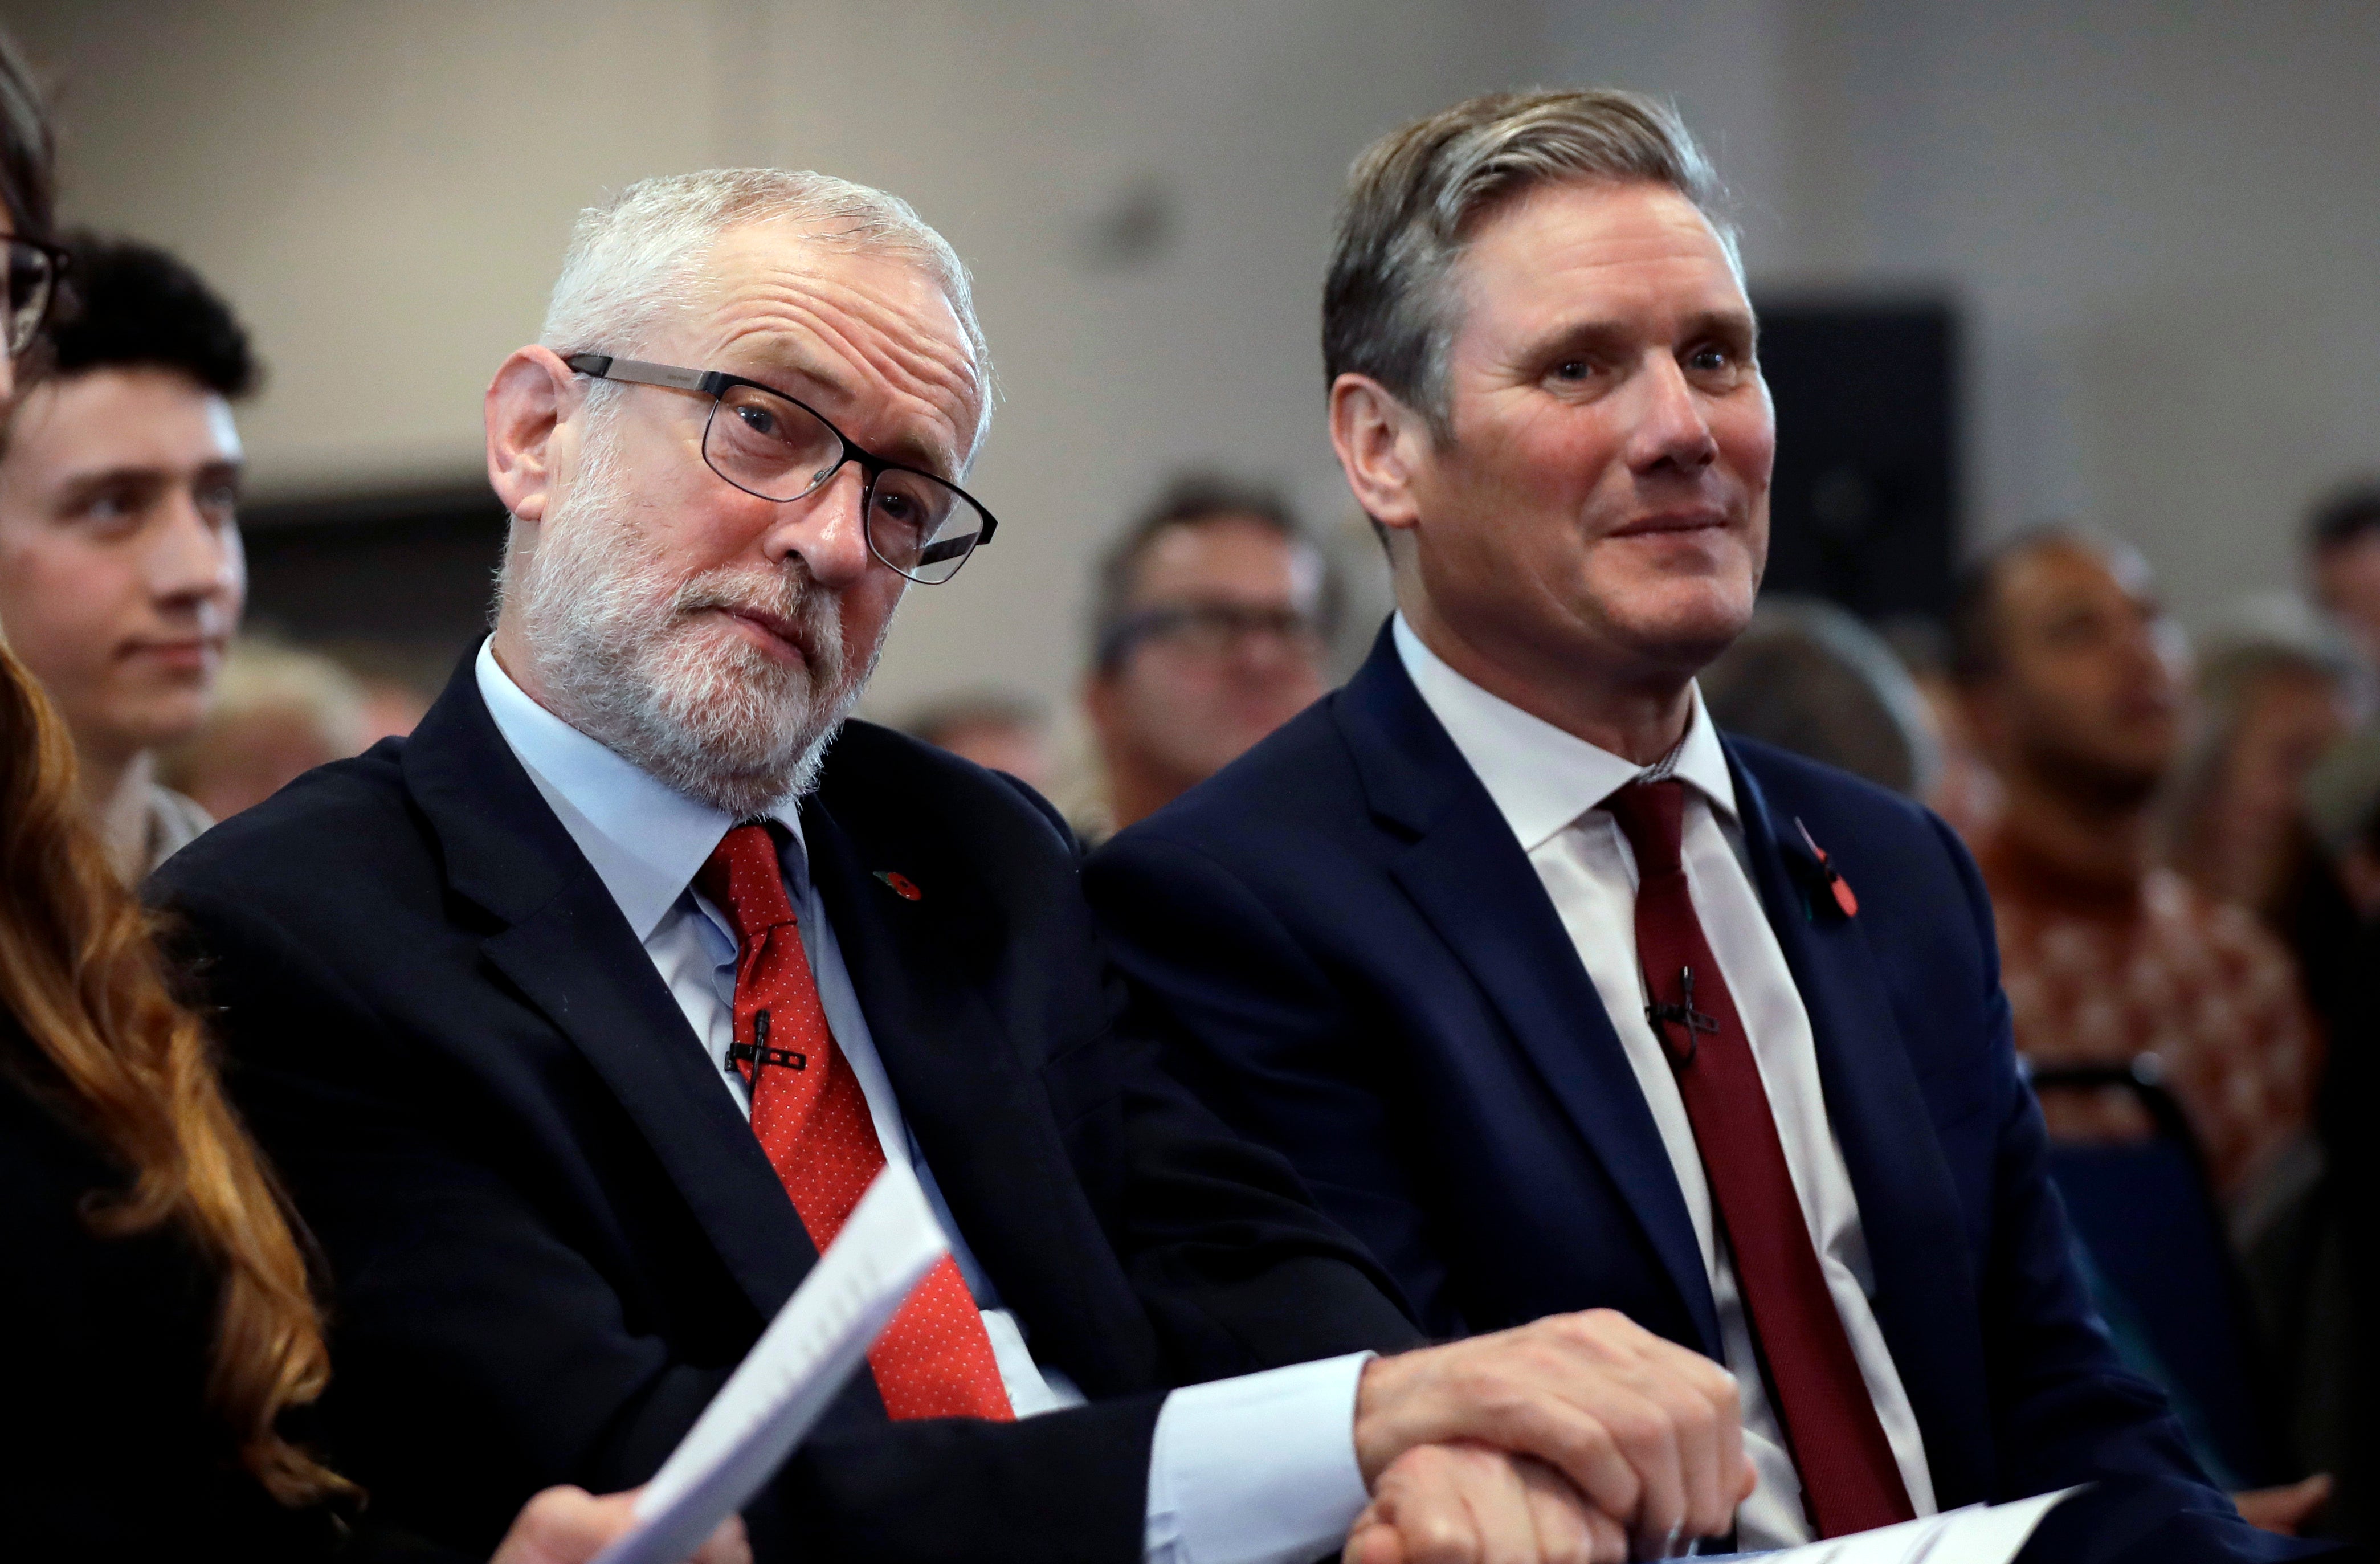 Former Labour Party leader Jeremy Corbyn and Sir Keir Starmer in 2019